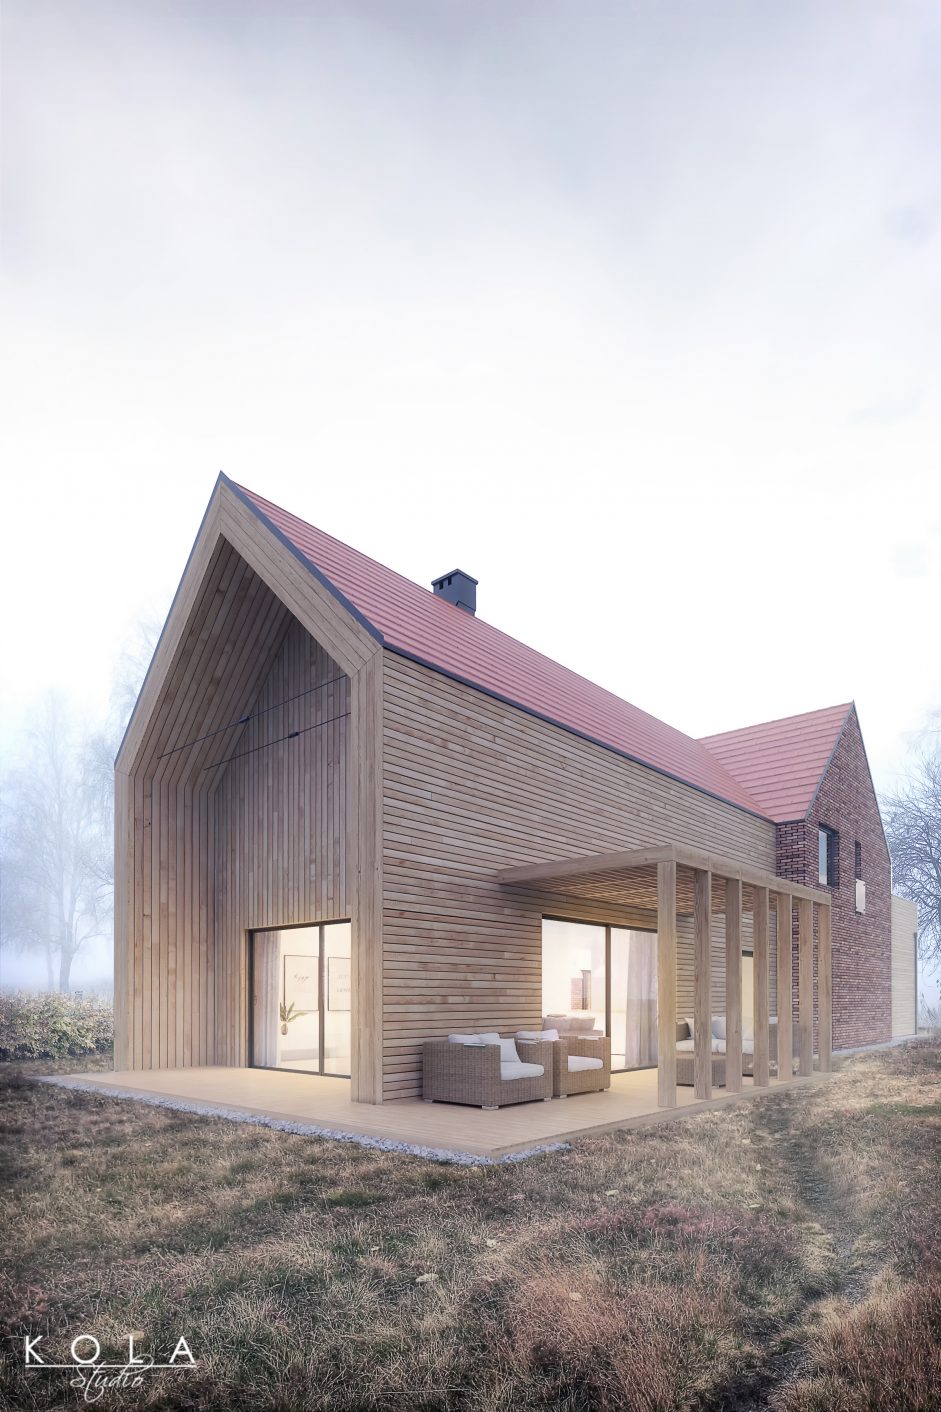 rural barn style house visualization with brick and wood facades shown in an autumn season 2